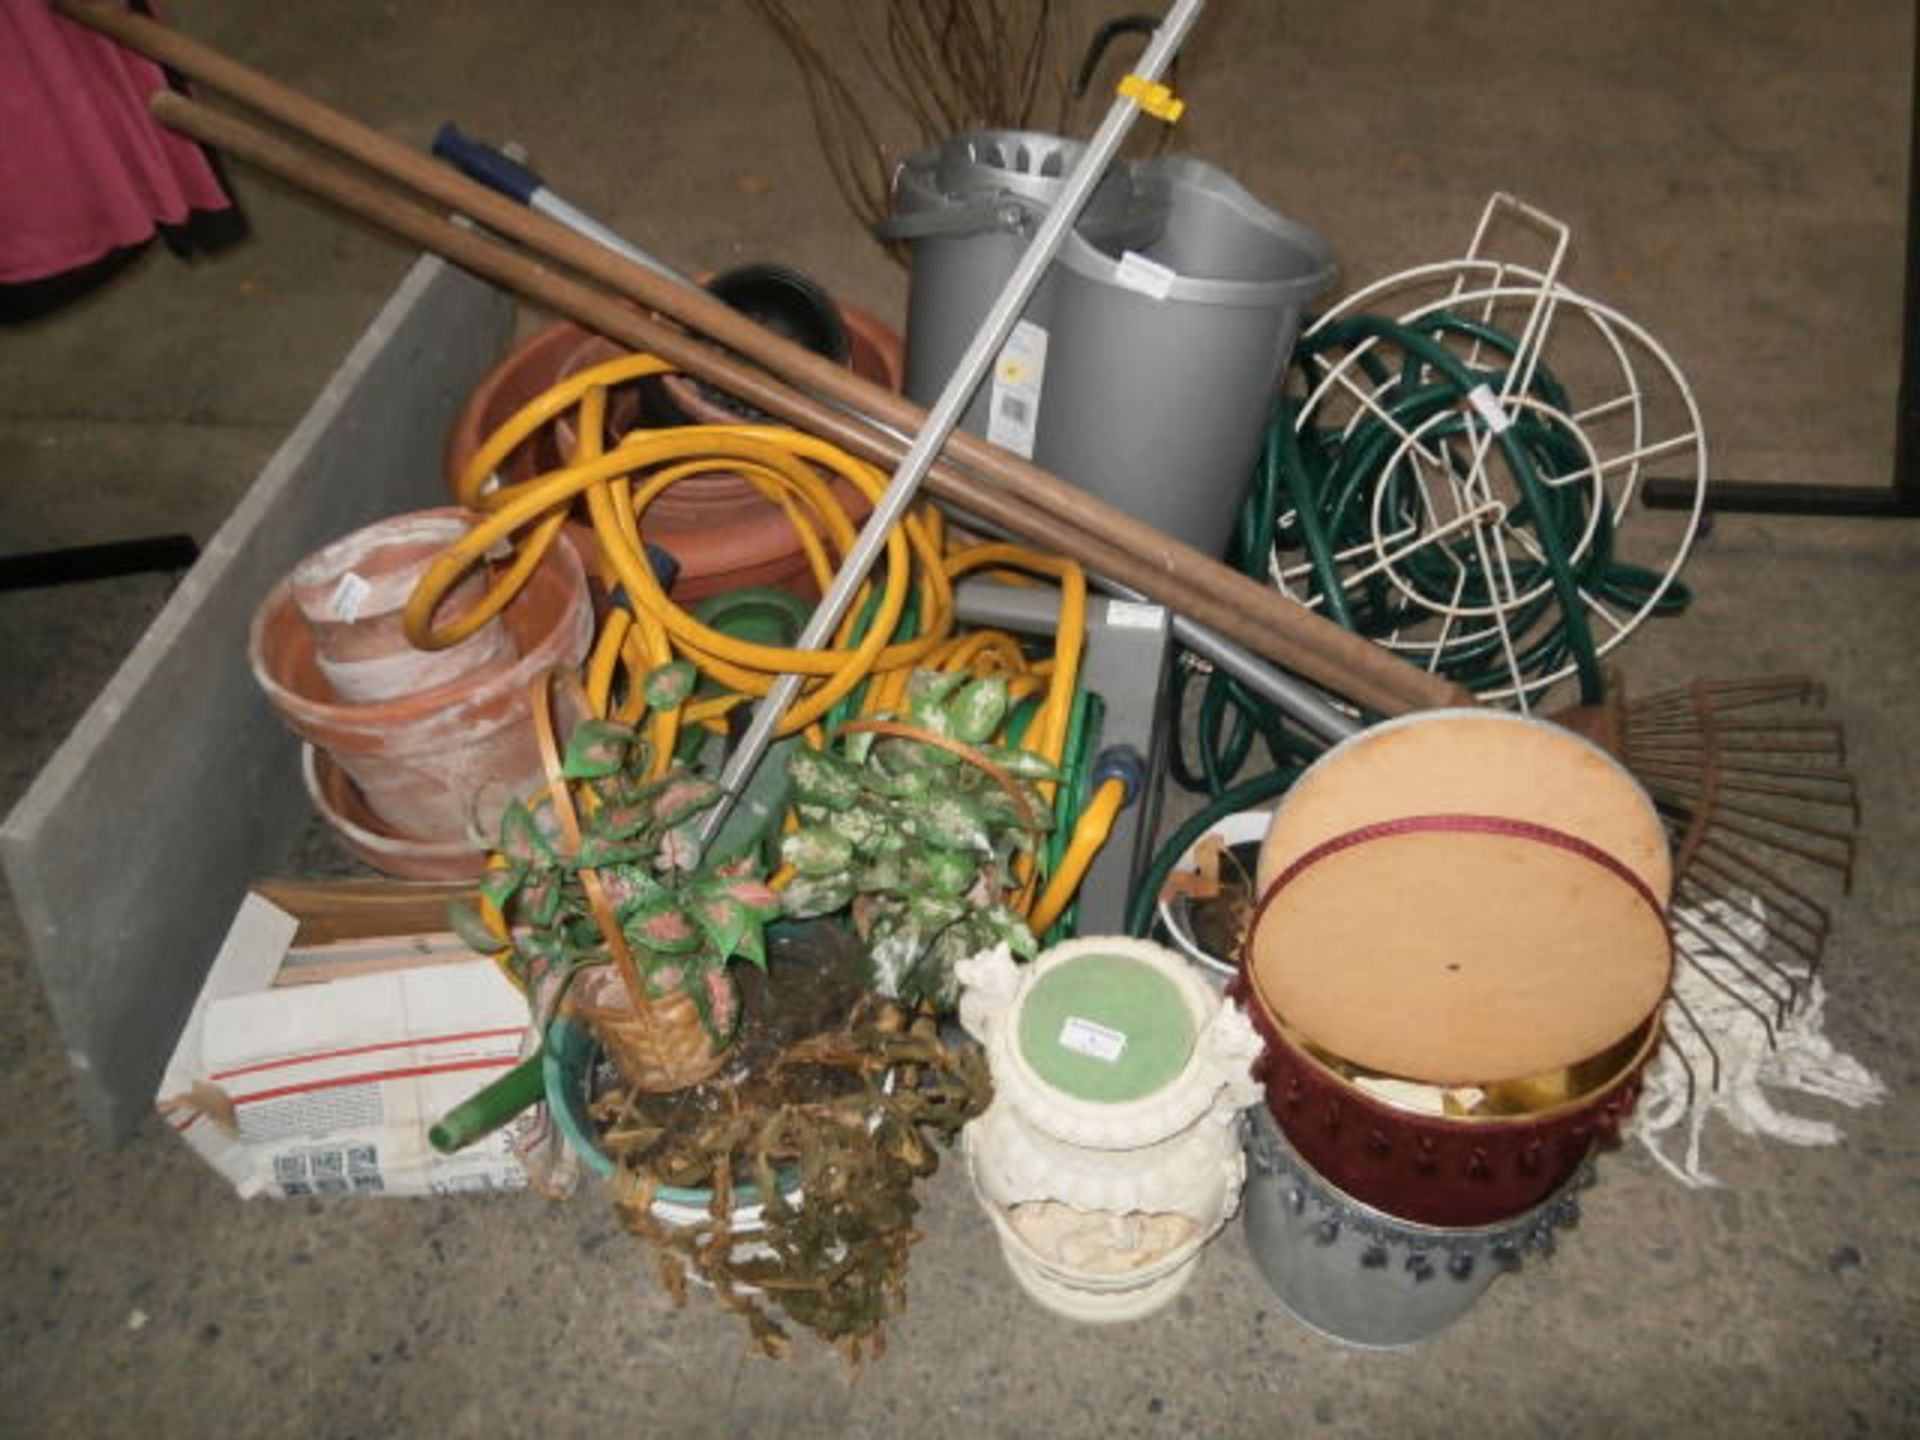 Selection of hoses and terracotta plant pots etc